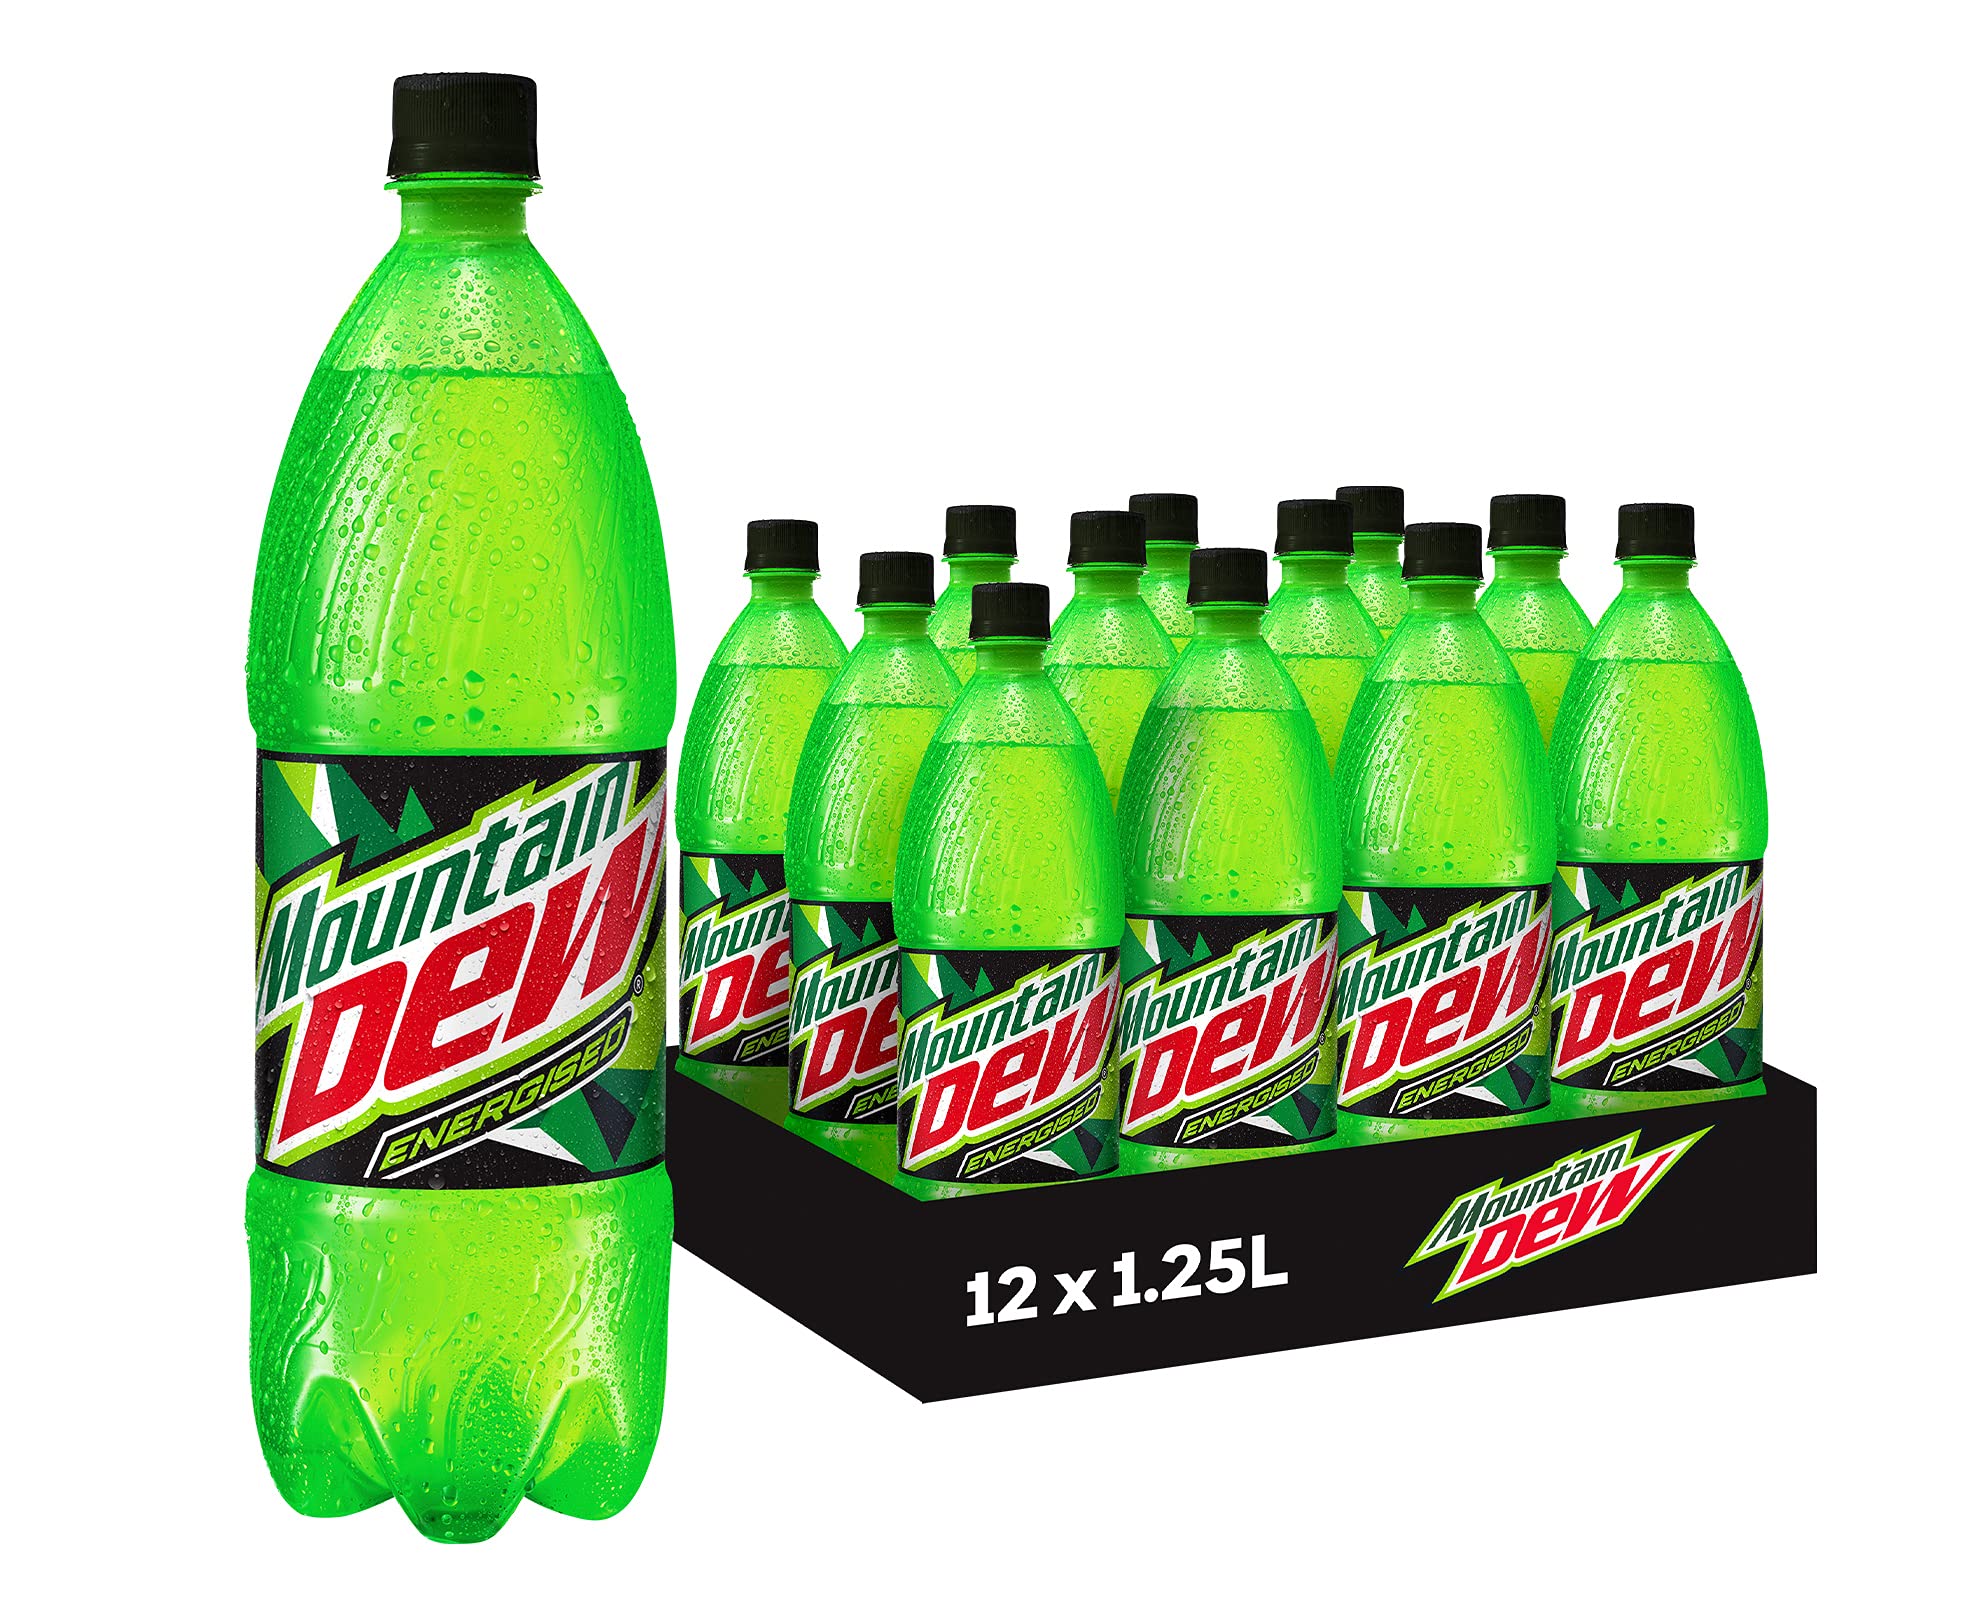 10 Reasons Why You Should Never, Ever Drink Mountain Dew